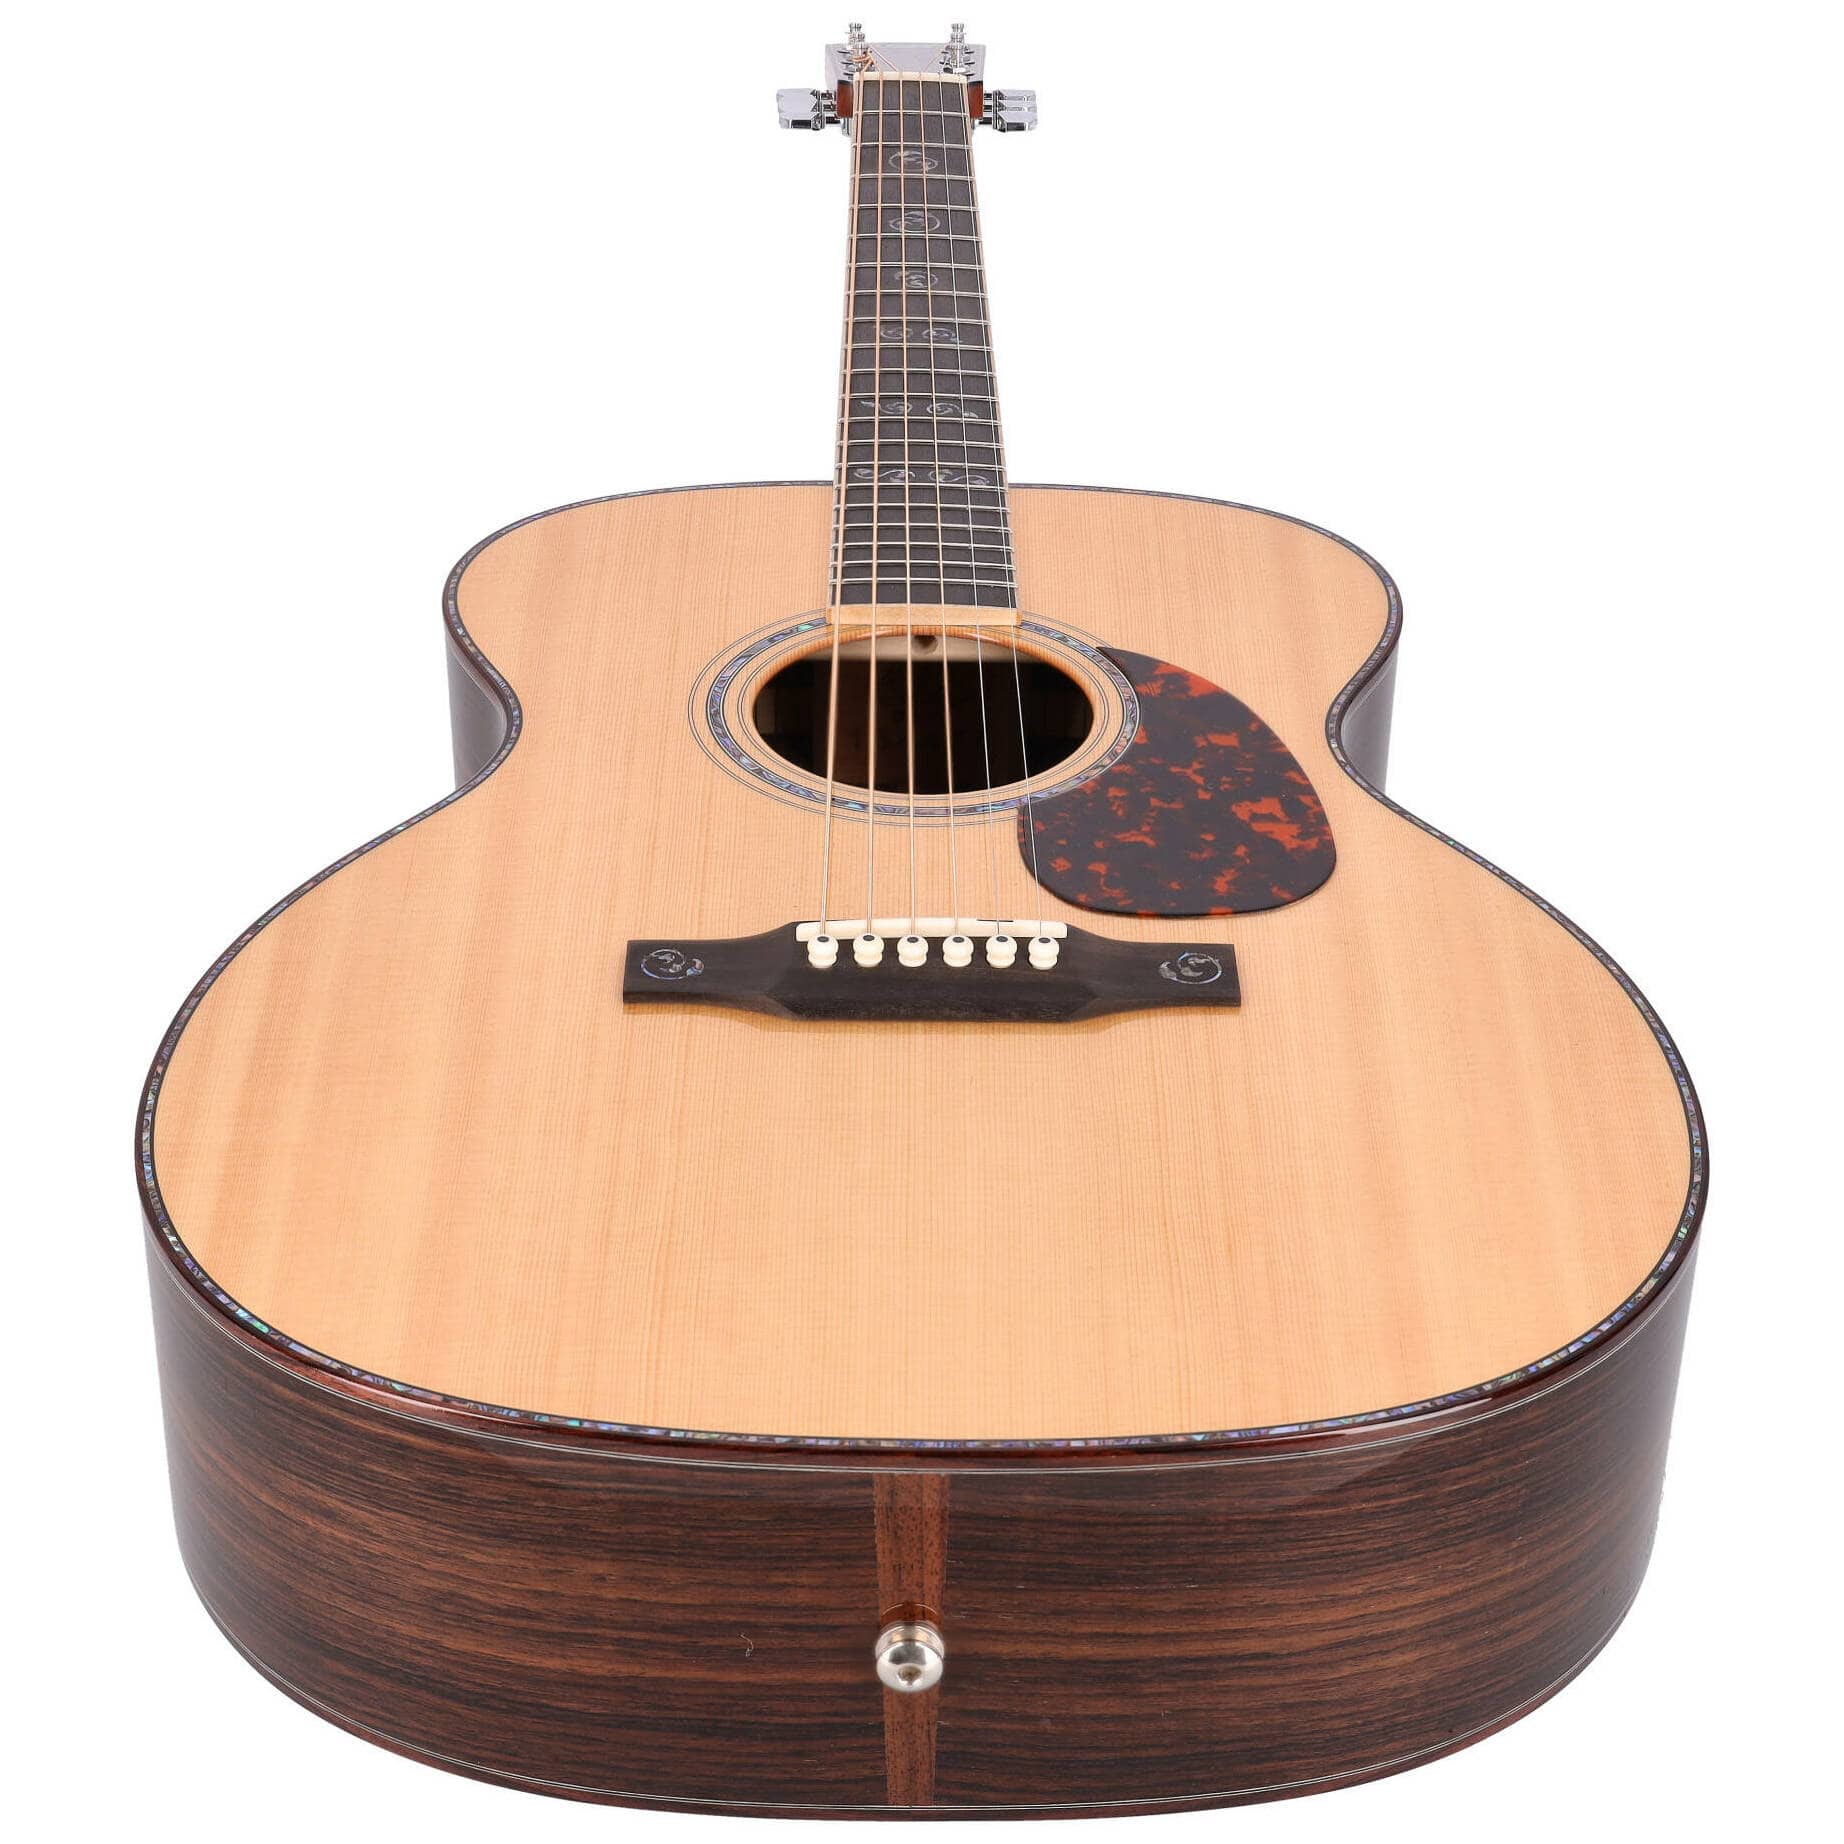  10 Rosewood Deluxe Serie, OM-10, Orchestra Body 3